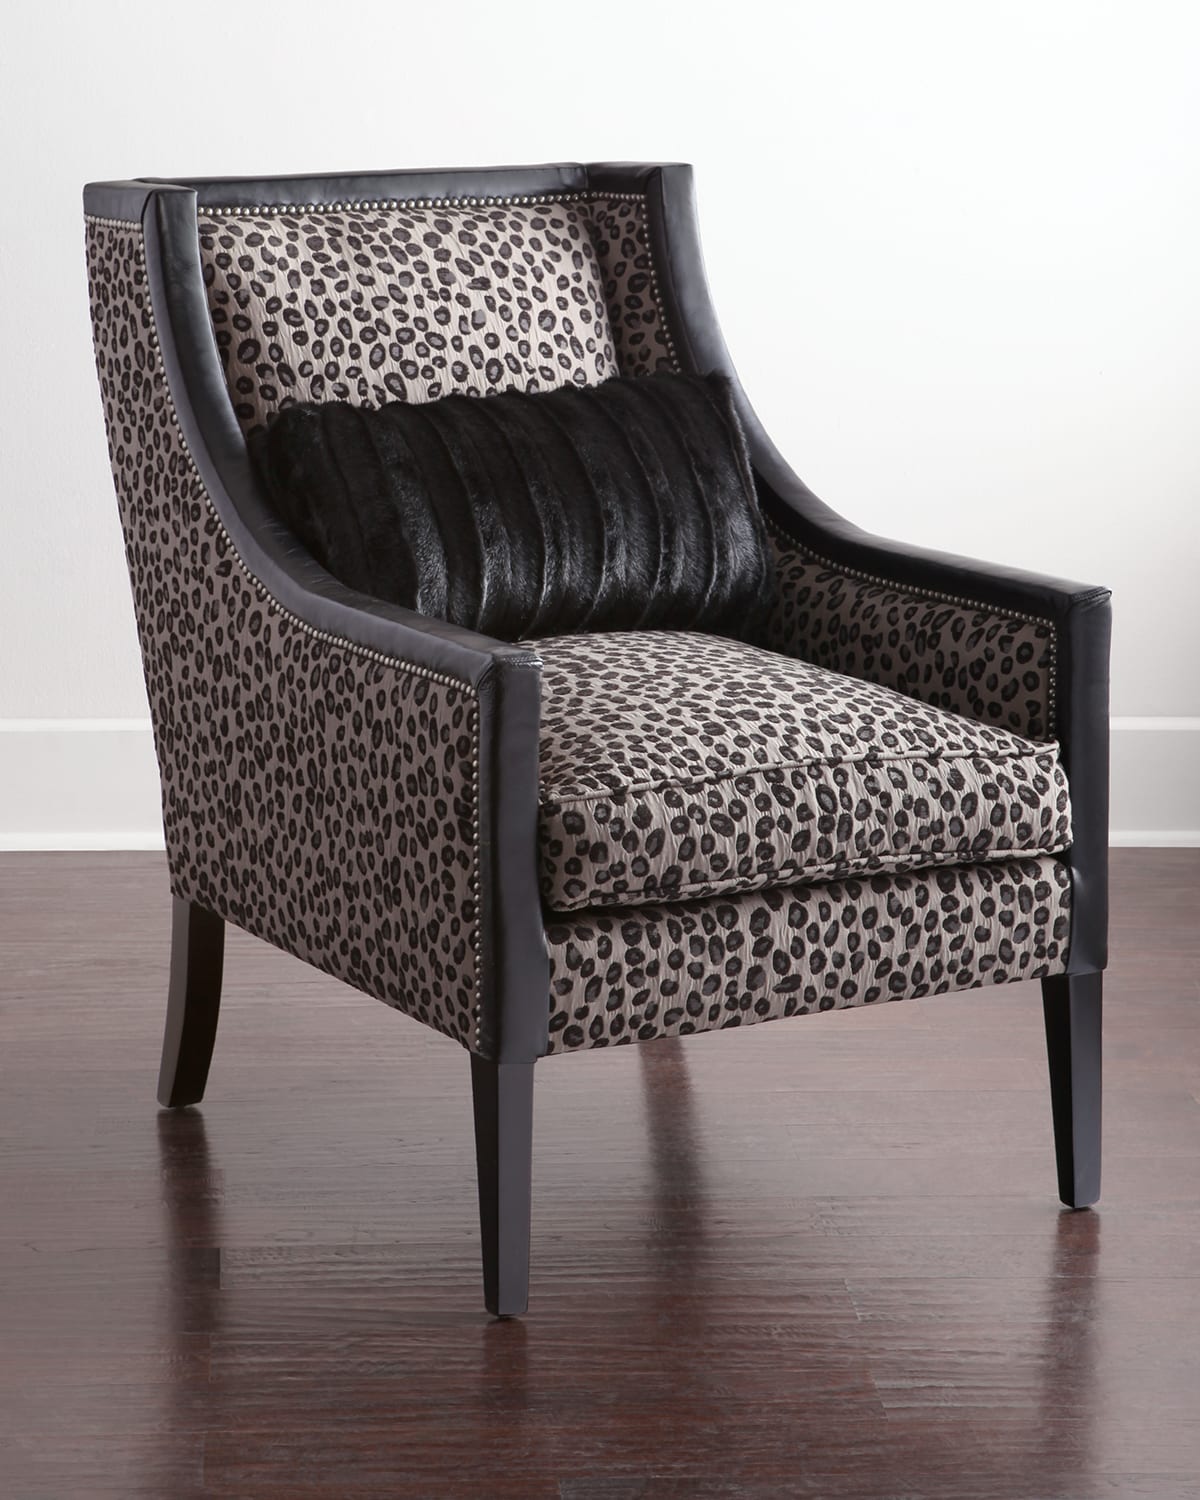 Old Hickory Tannery Milani Cheetah Chair In Gray Cheetah